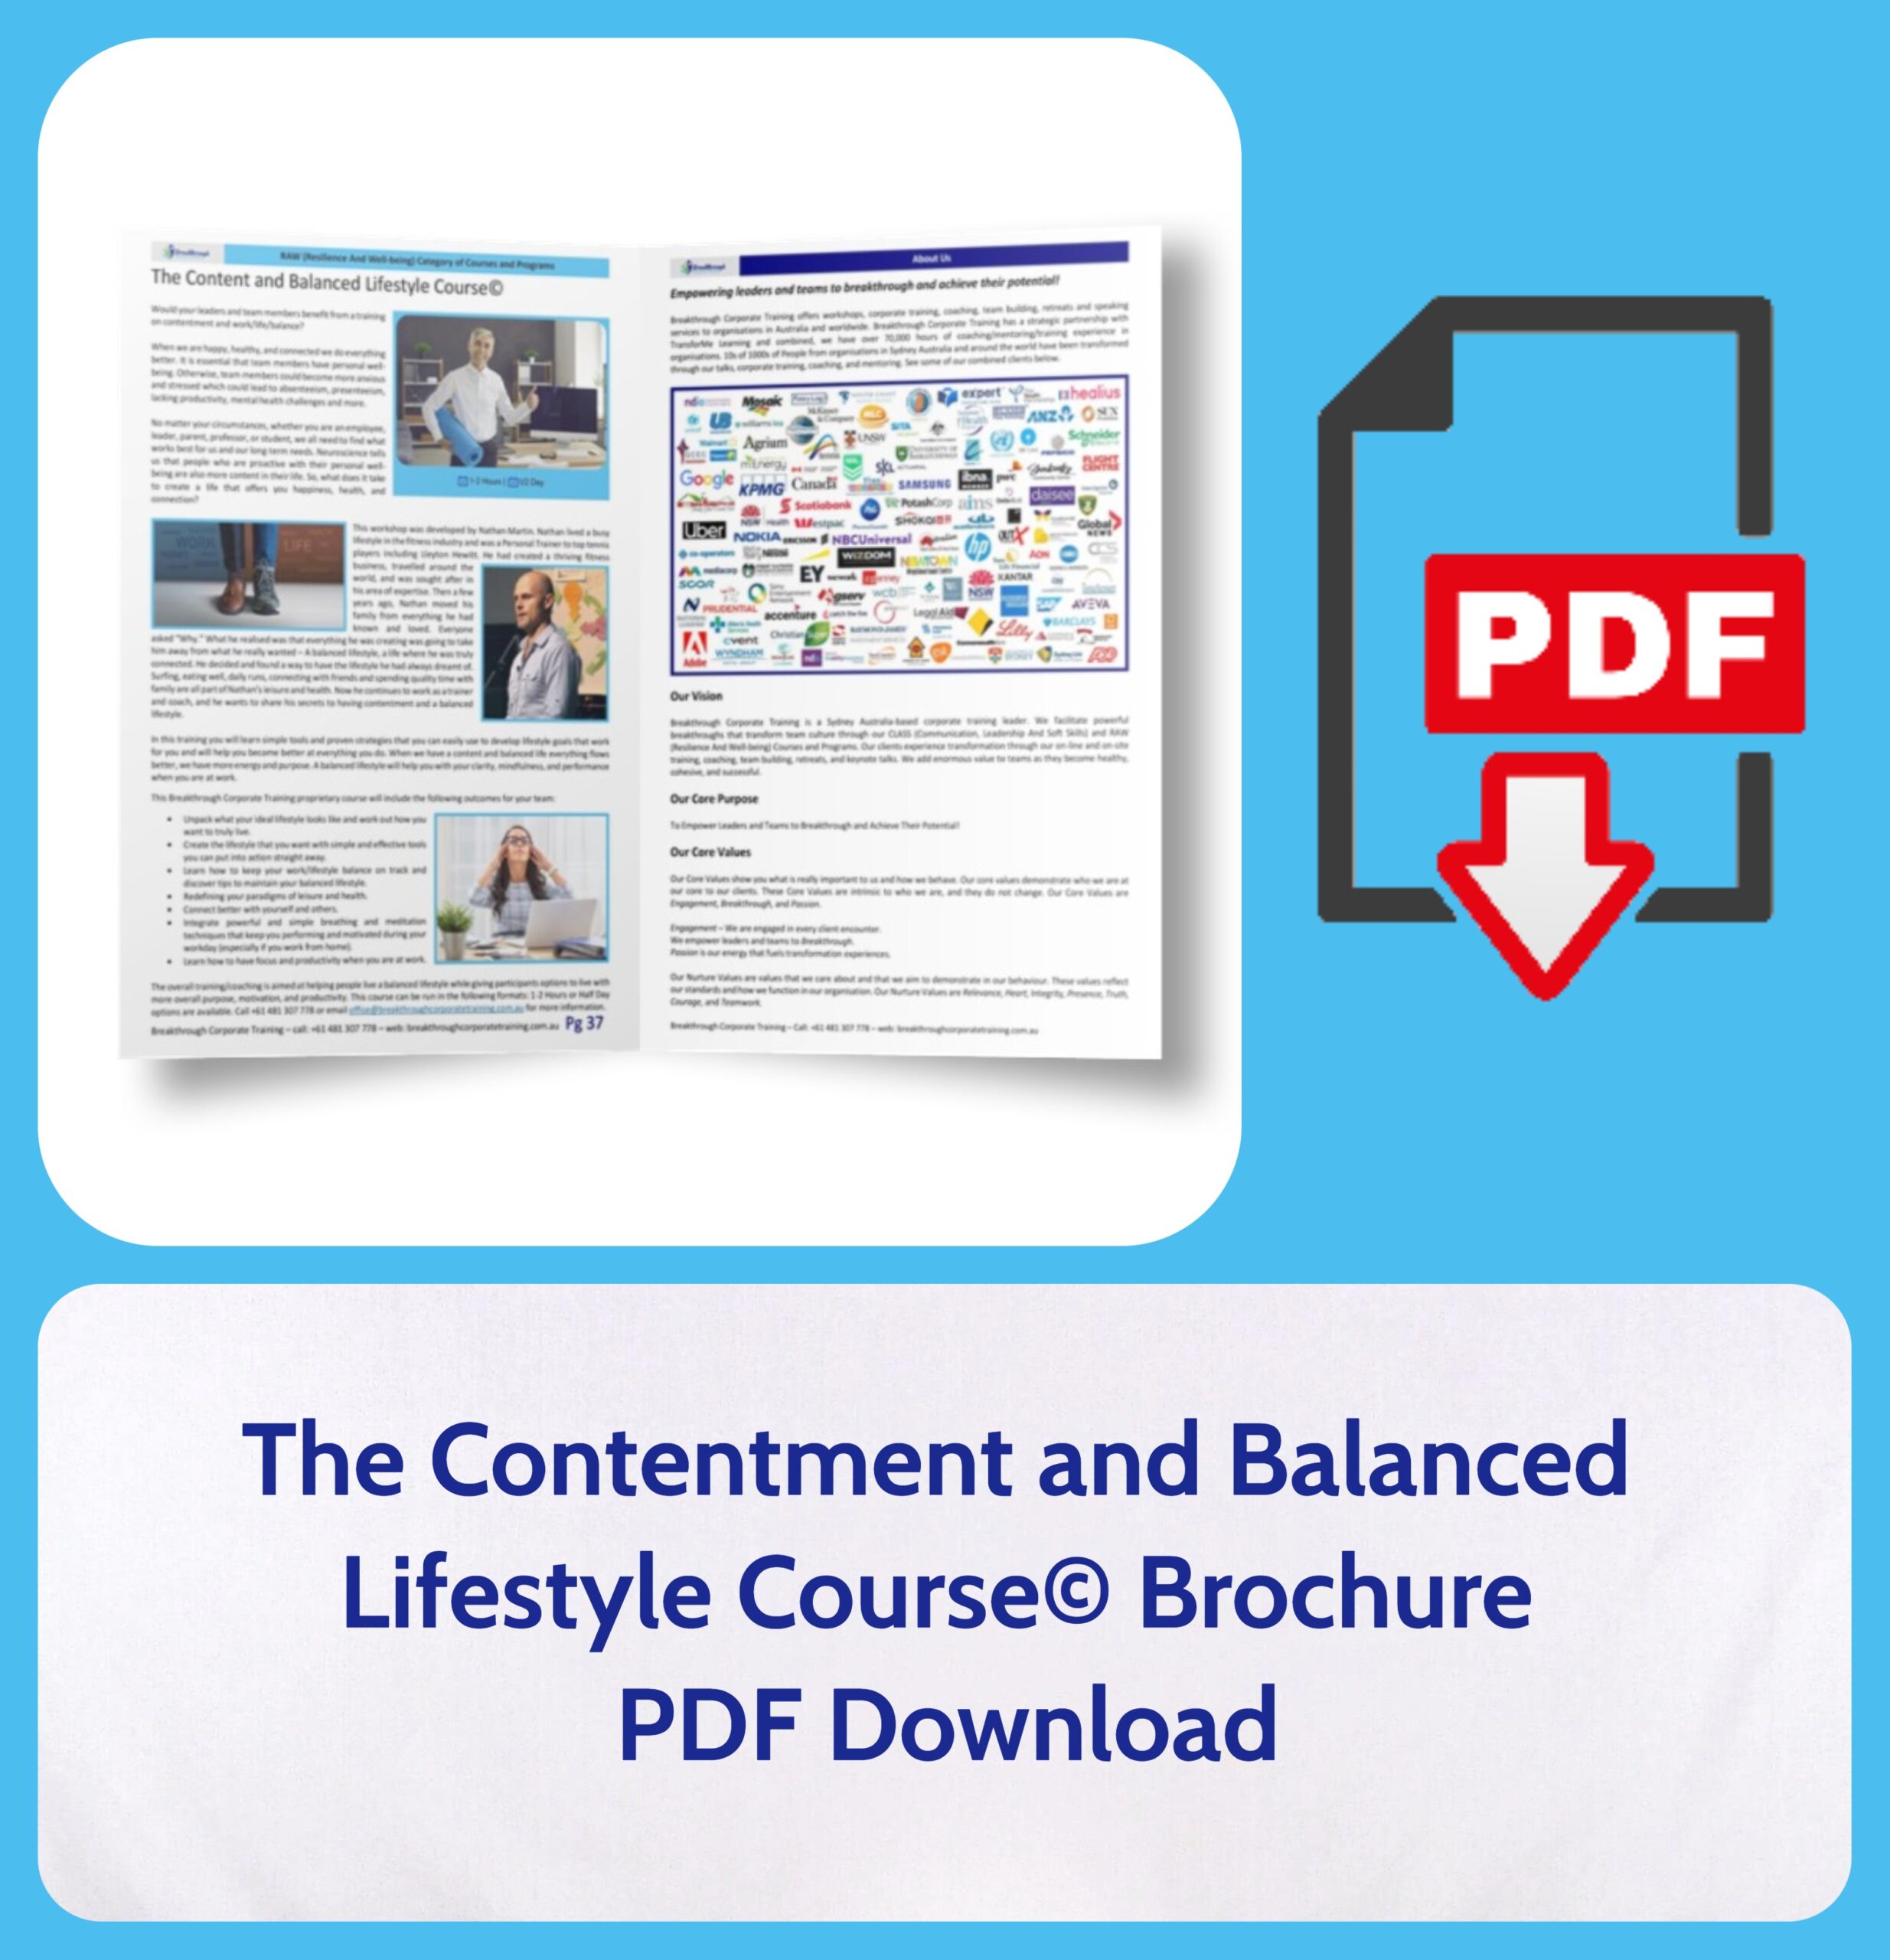 The Contentment and Balanced Lifestyle Course